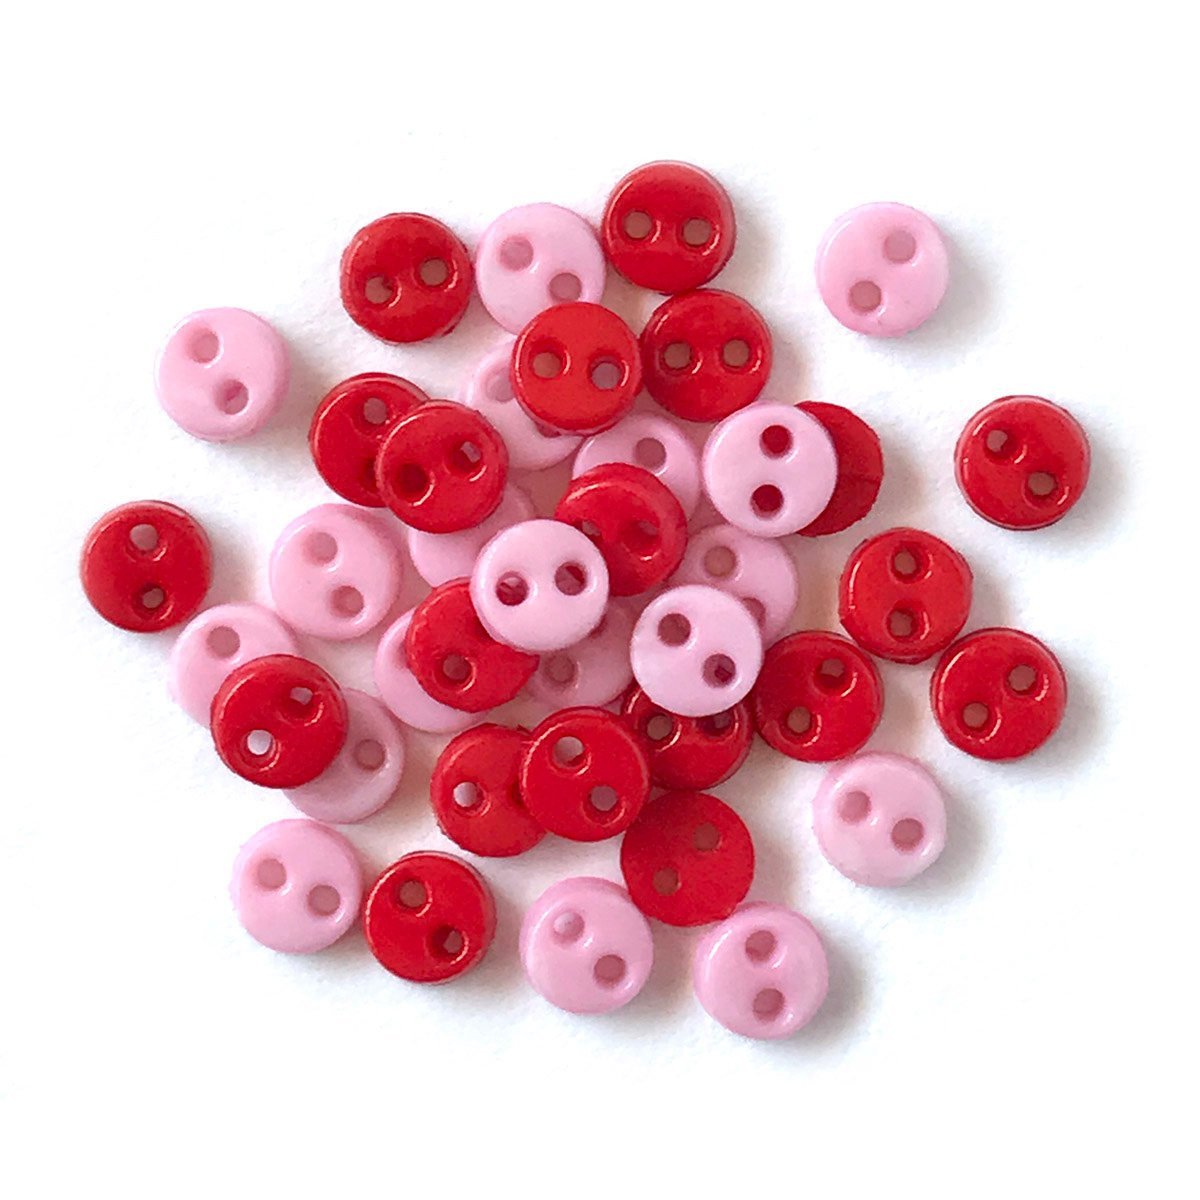 30PCS Upick 13mm Mini 2Holes Plastic Buttons For Kid's Sewing Crafts Lots  Mix